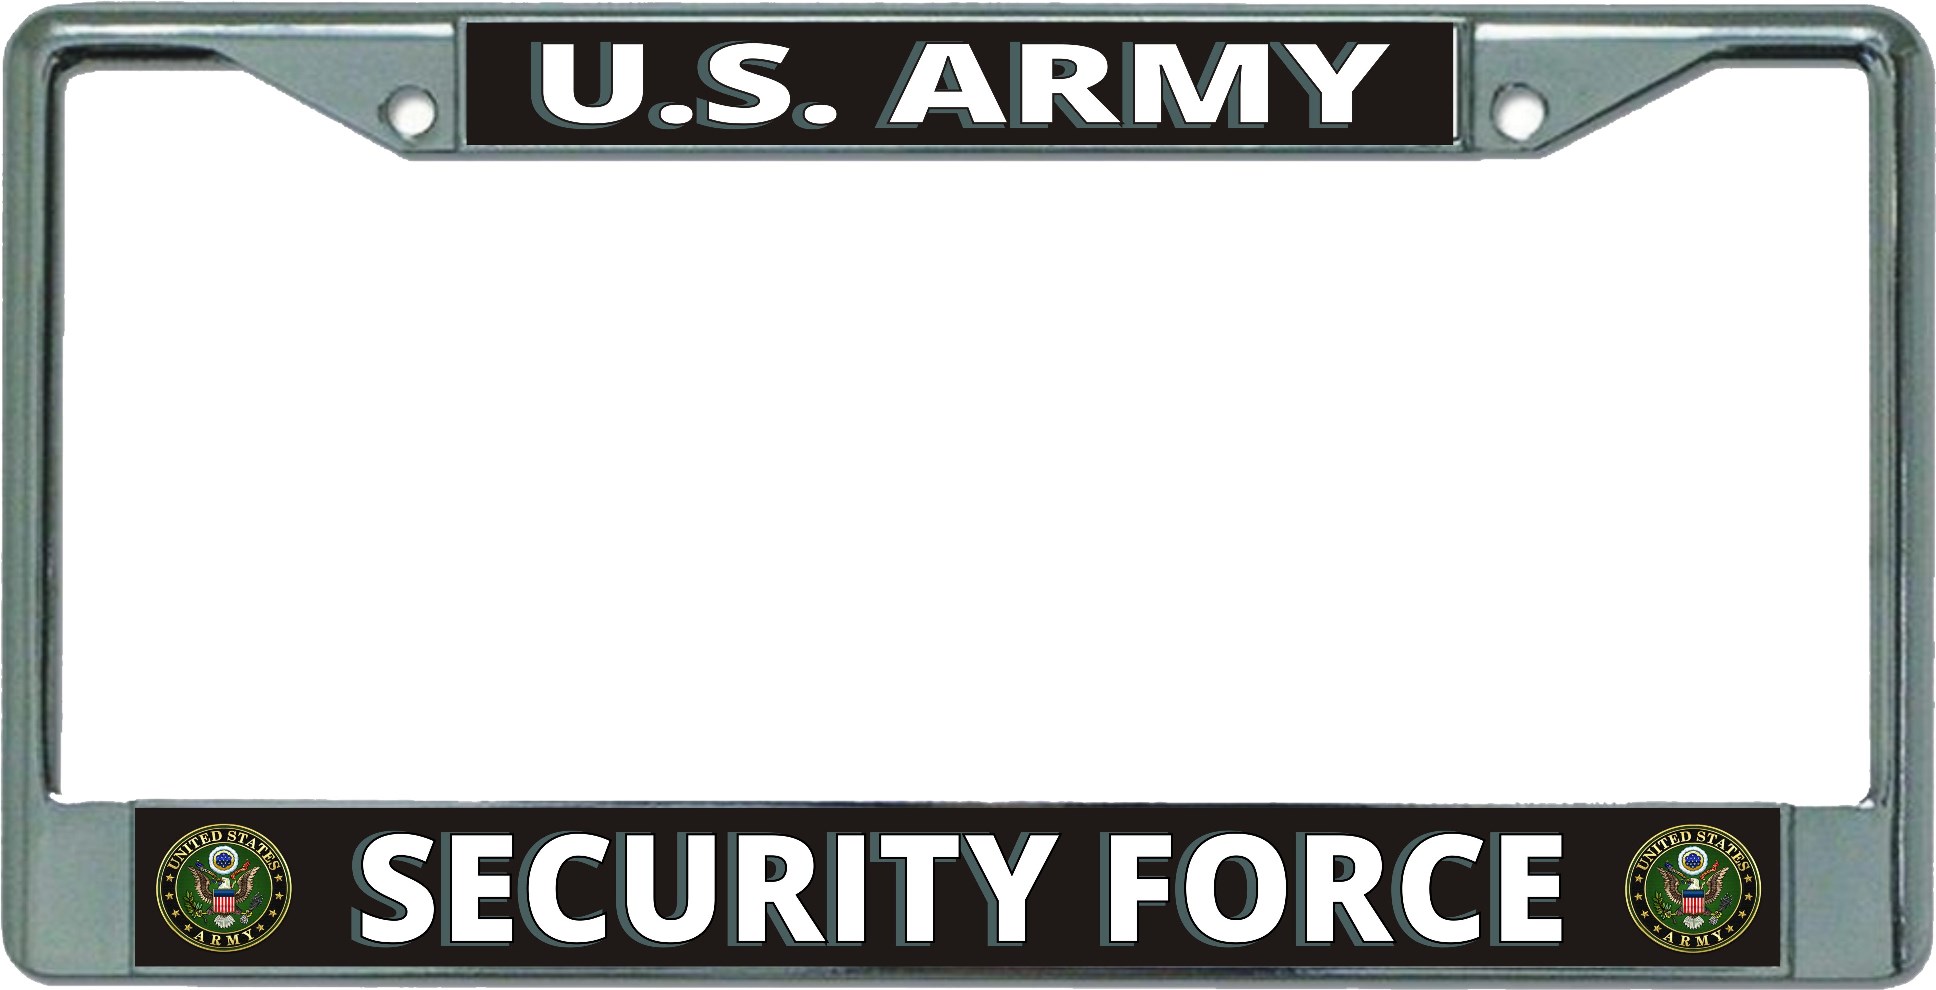 U.S. Army Security Force Chrome LICENSE PLATE Frame